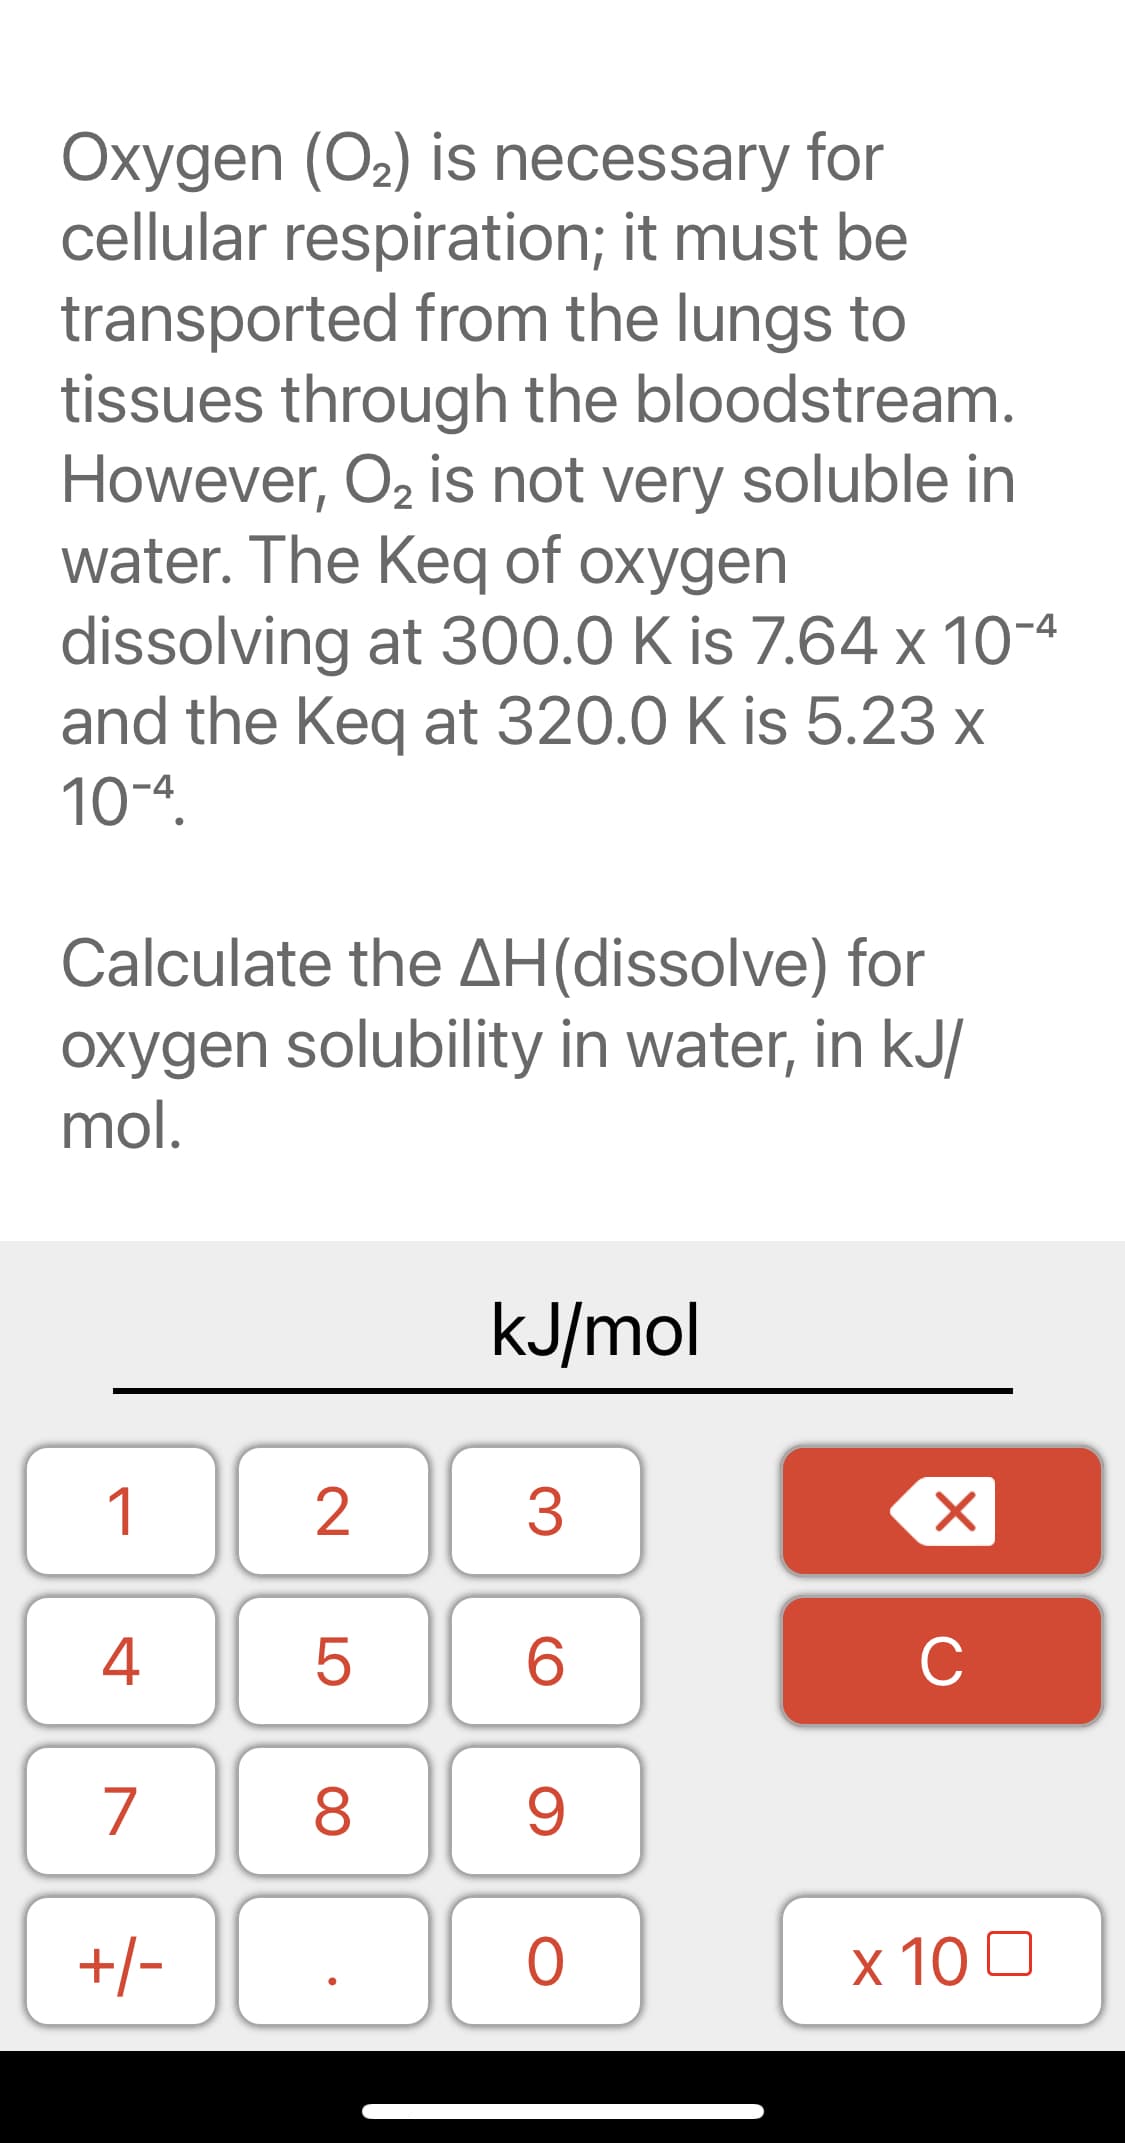 Oxygen (O2) is necessary for
cellular respiration; it must be
transported from the lungs to
tissues through the bloodstream.
However, O2 is not very soluble in
water. The Keq of oxygen
dissolving at 300.0 K is 7.64 x 10-4
and the Keq at 320.0 K is 5.23 x
10-ª.
Calculate the AH(dissolve) for
oxygen solubility in water, in kJ/
mol.
kJ/mol
1
3
4
C
7
8
+/-
х 100
2.
LO
